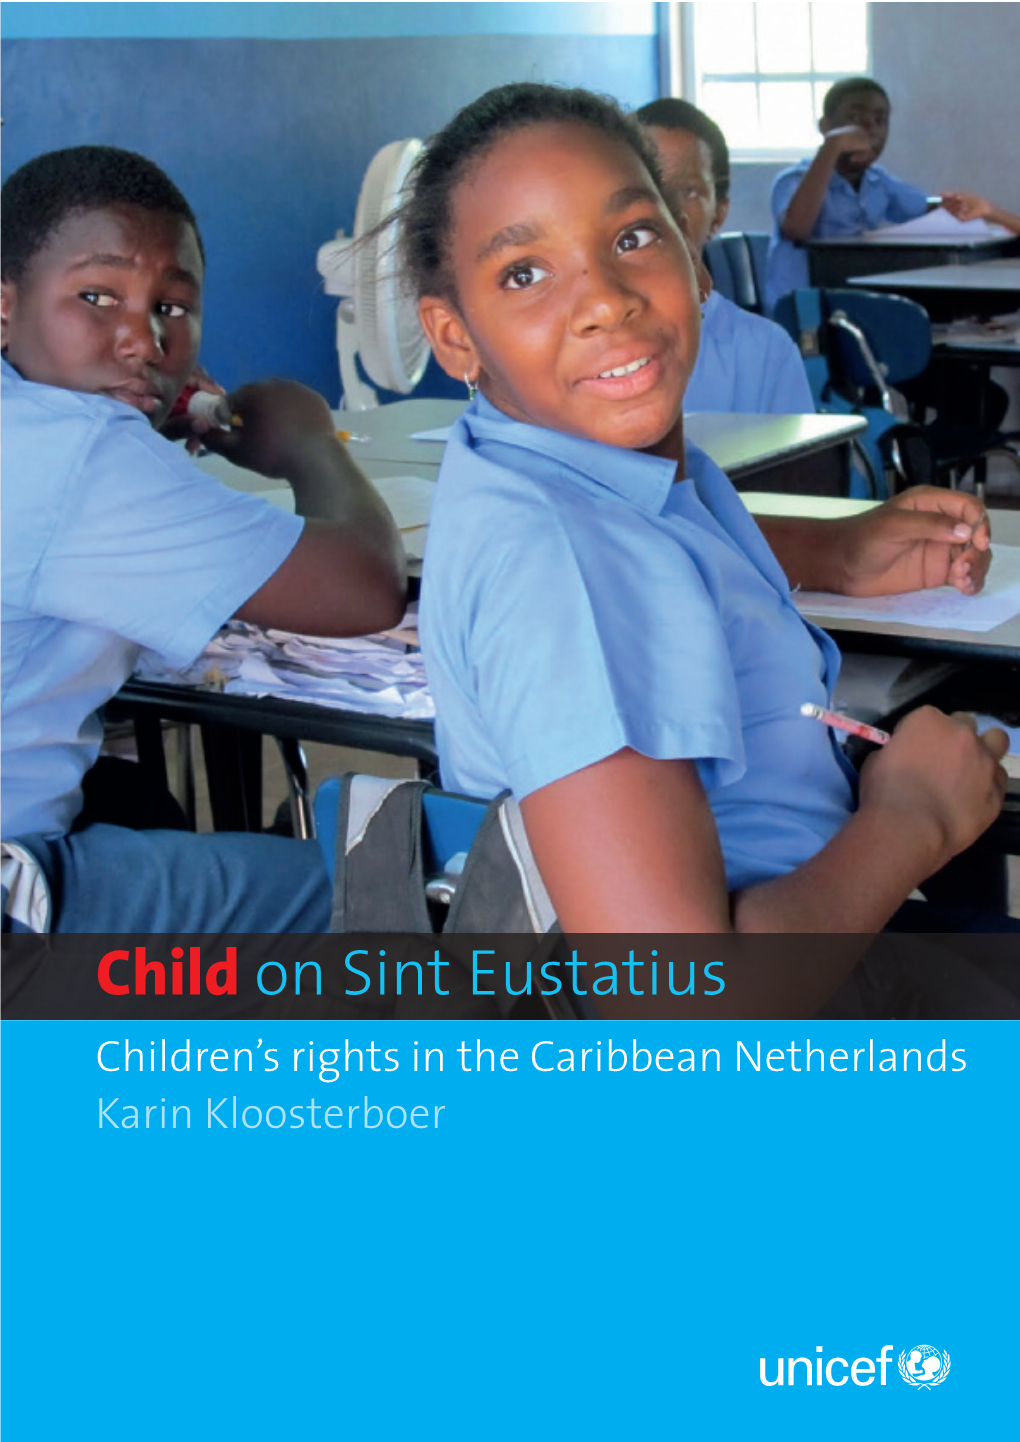 St.!Eustatius! Children’S!Rights!In!The!Caribbean!Netherlands! Karin!Kloosterboer! ! ! ! ! ! ! ! ! ! ! ! ! ! ! ! ! ! ! ! ! ! ! ! ! ! ! ! ! ! ! ! ! ! ! ! May!2013! ! !